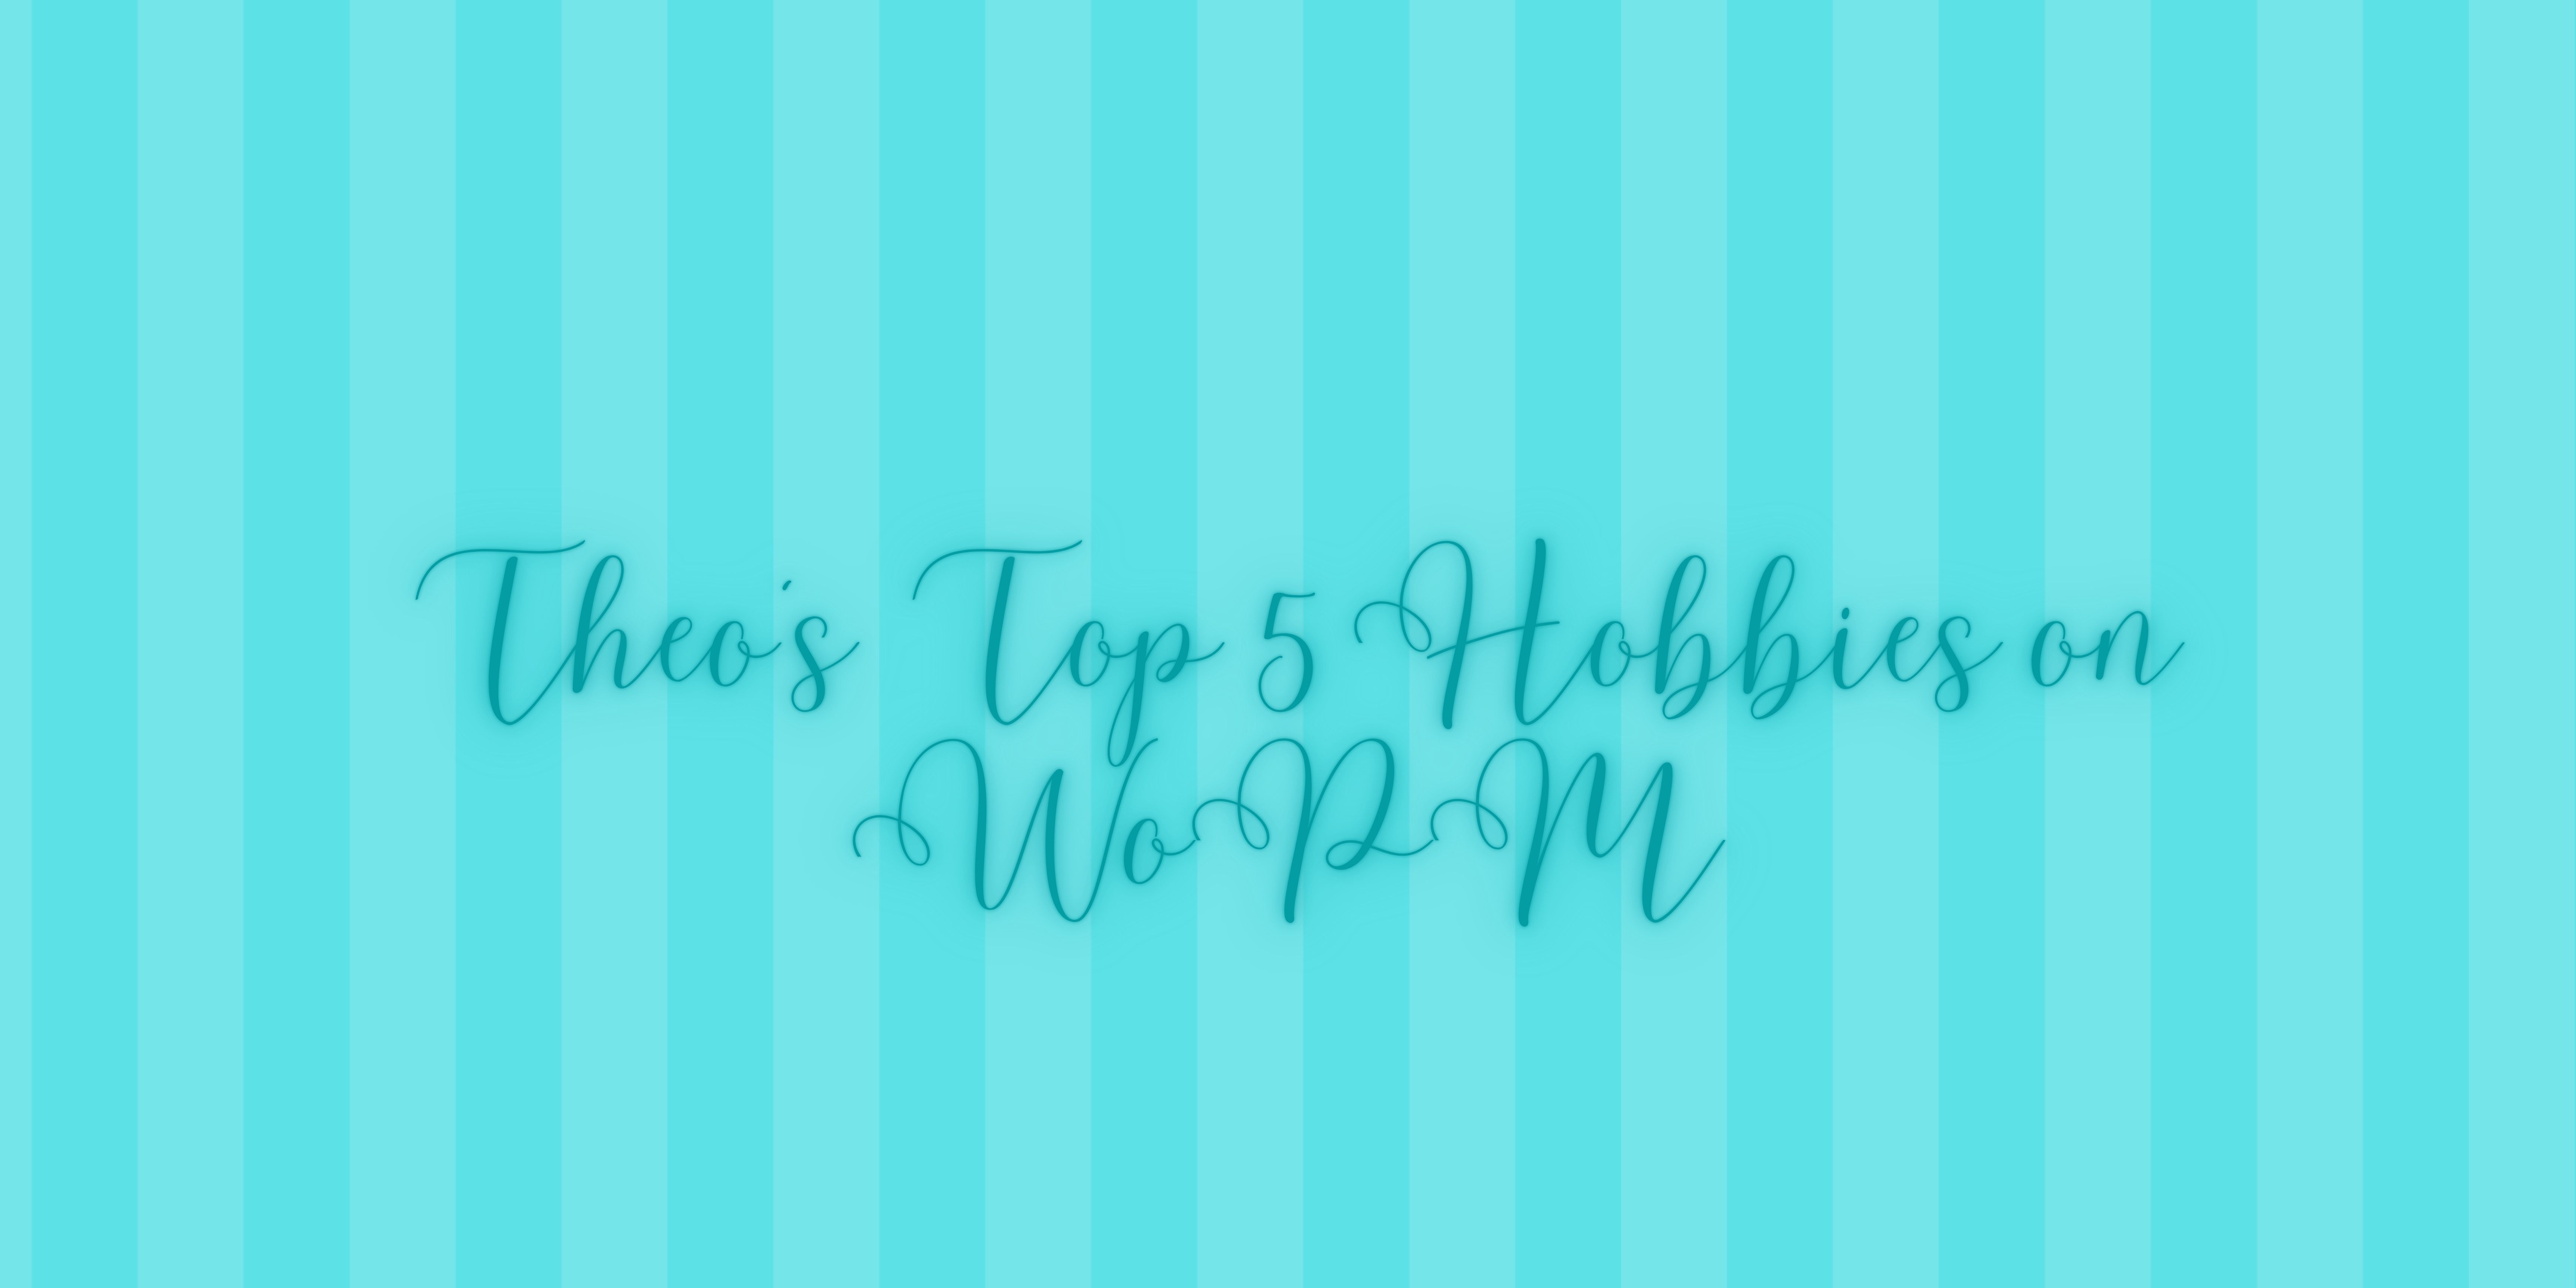 Theo's Top 5 Hobbies On WoPM